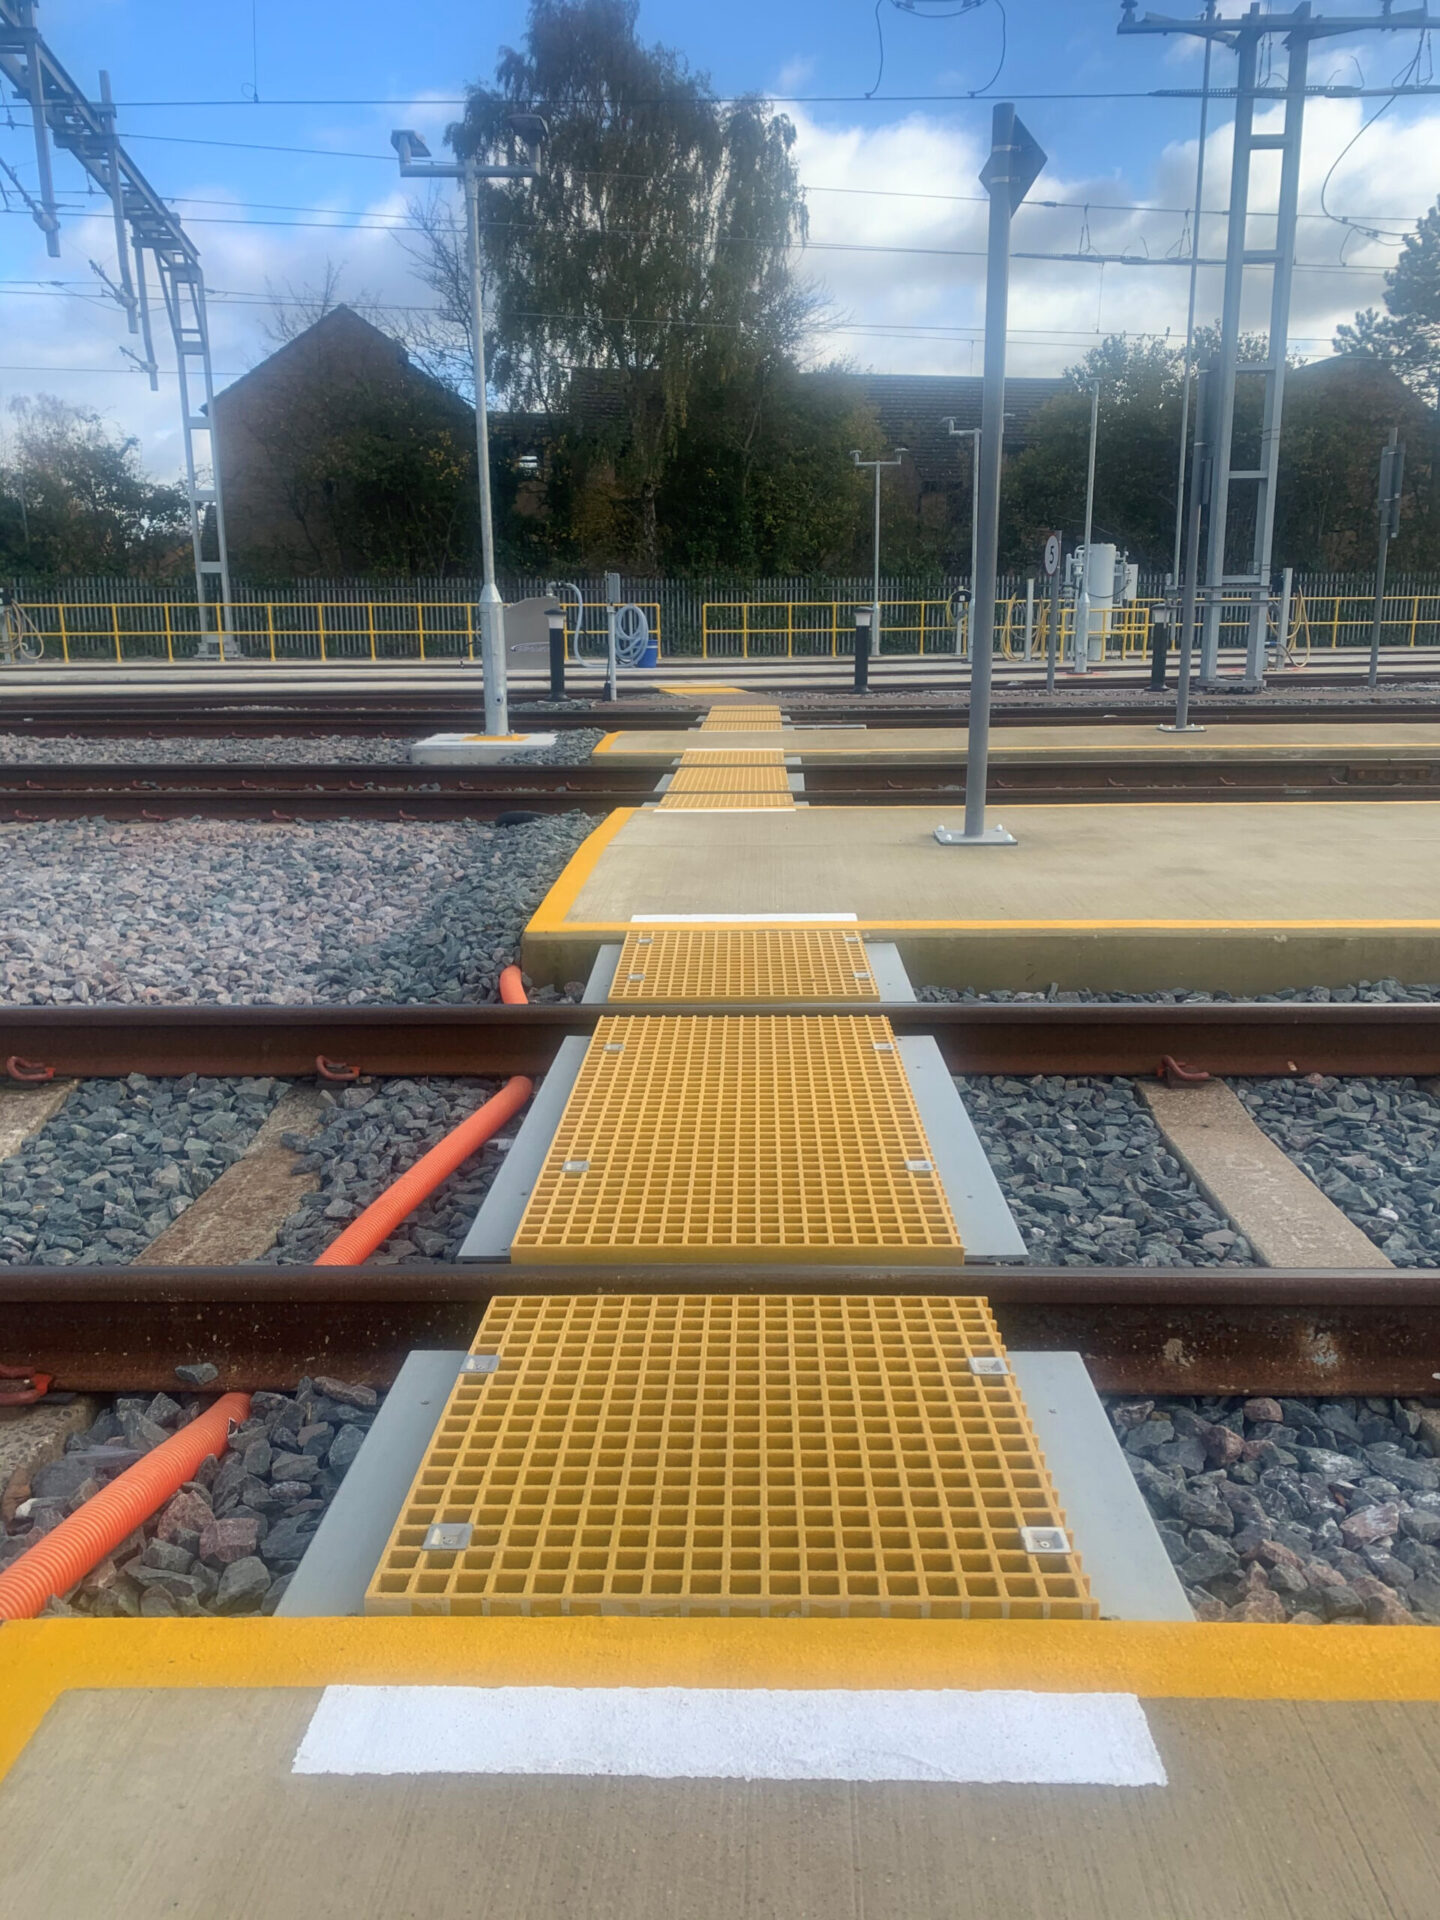 A GRP open mesh walkway comprising yellow mesh panels cut to fit between railway tracks to create a trip-free route from one side of the depot to the other